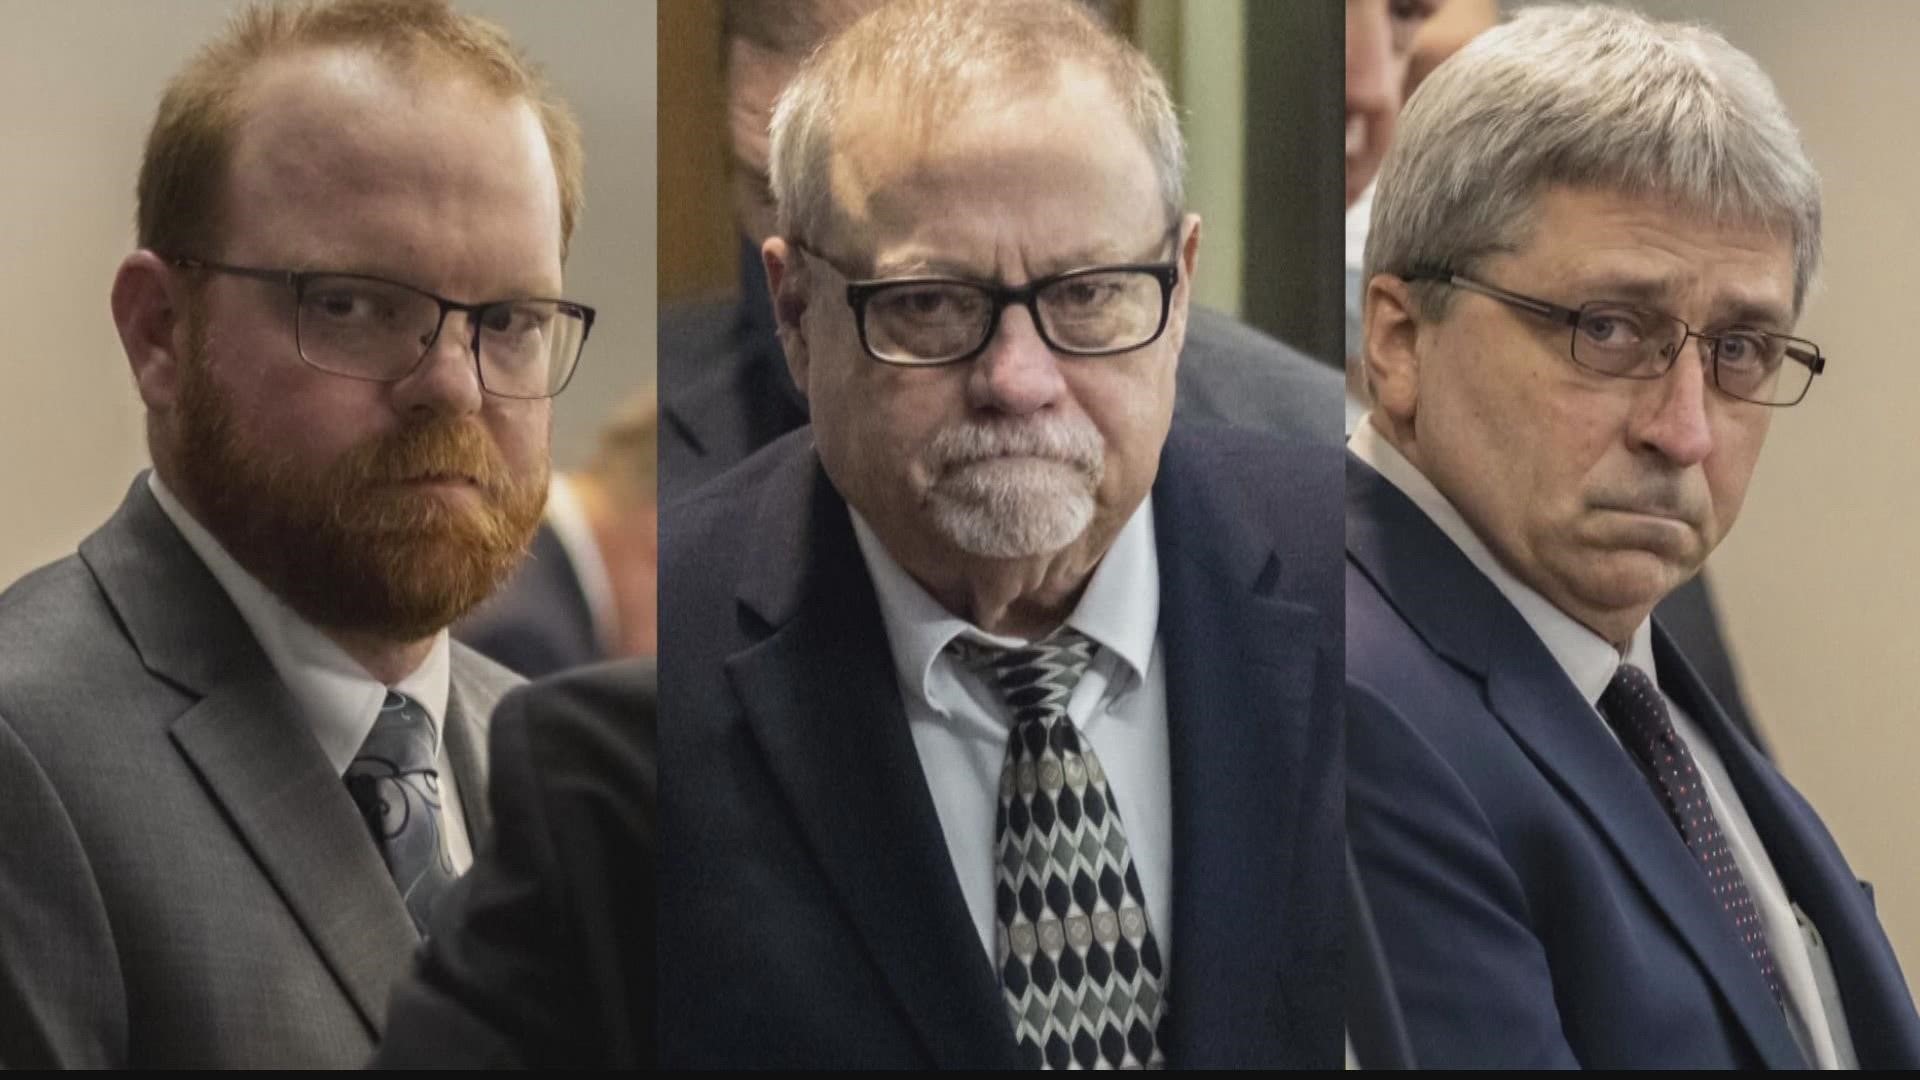 In addition to closing arguments, the jury is expected to begin deliberating Monday.